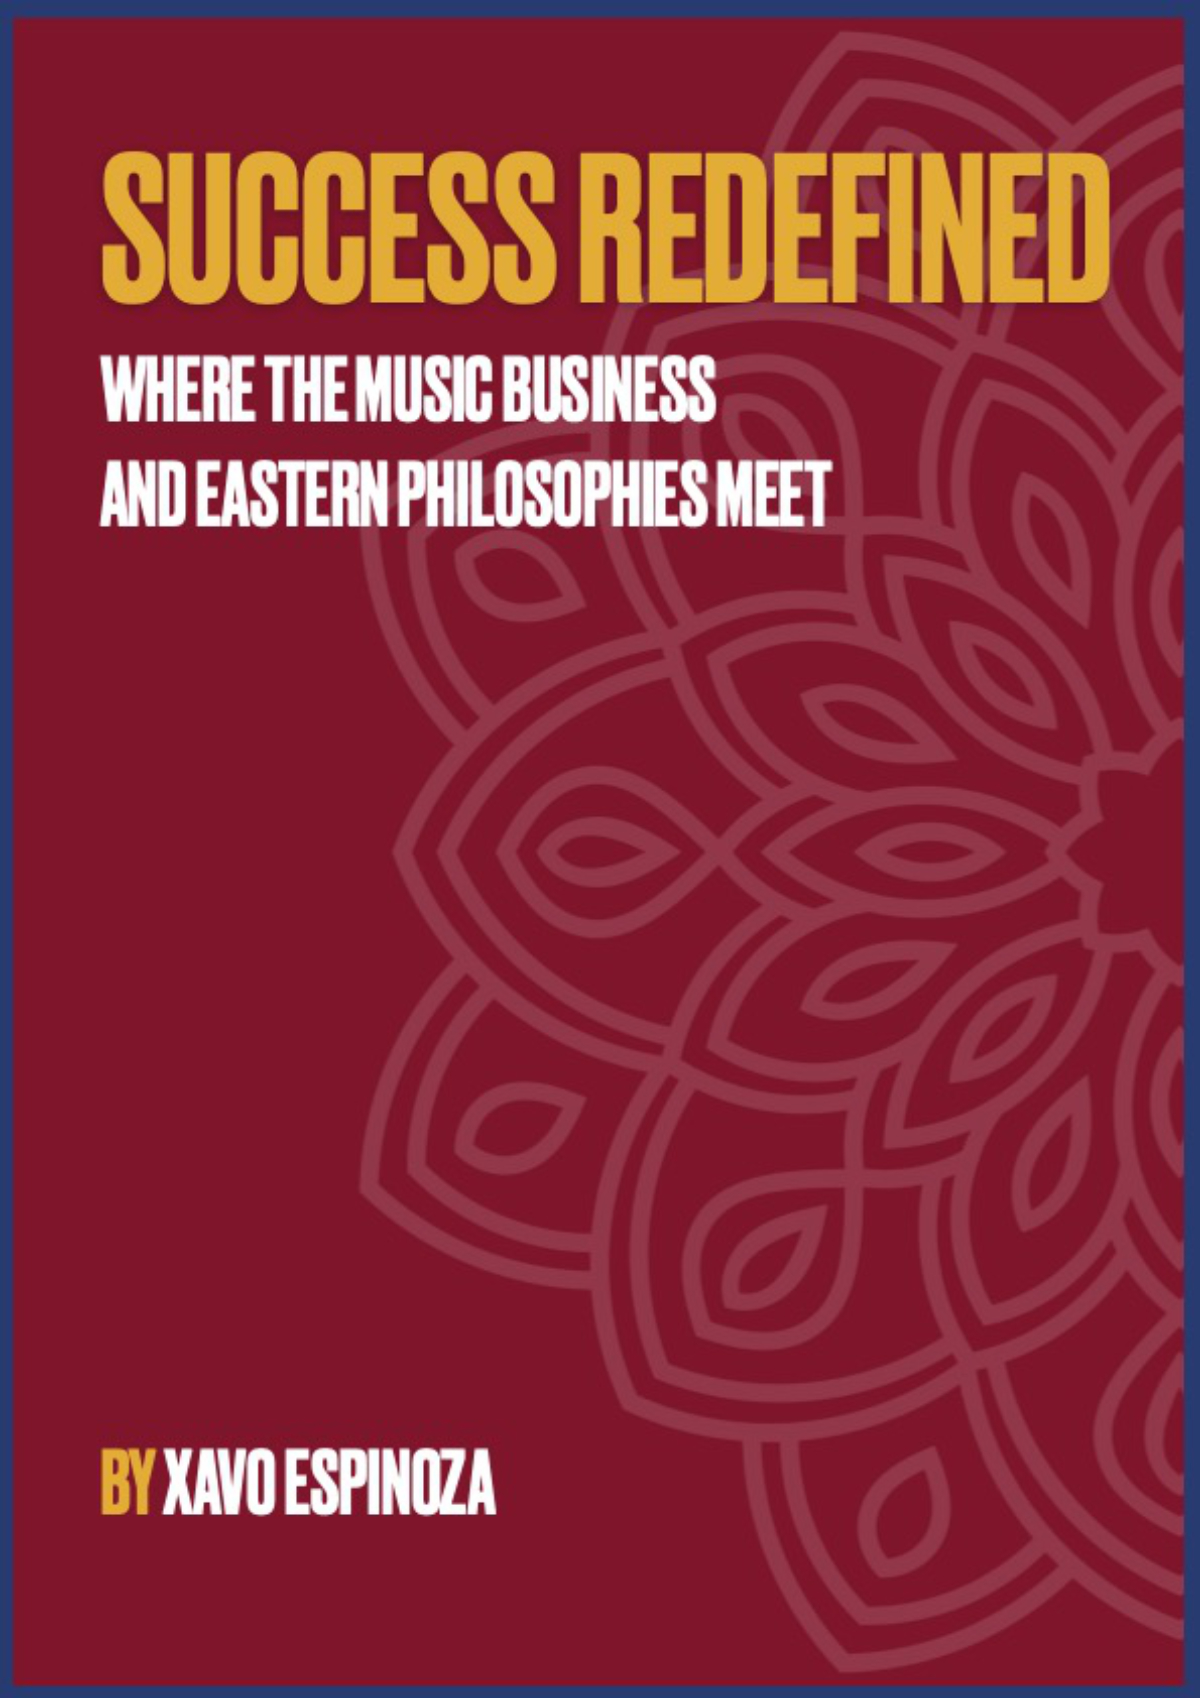 FREE: Success Redefined: Where the Music Business and Eastern Philosophies Meet by Xavo Espinoza